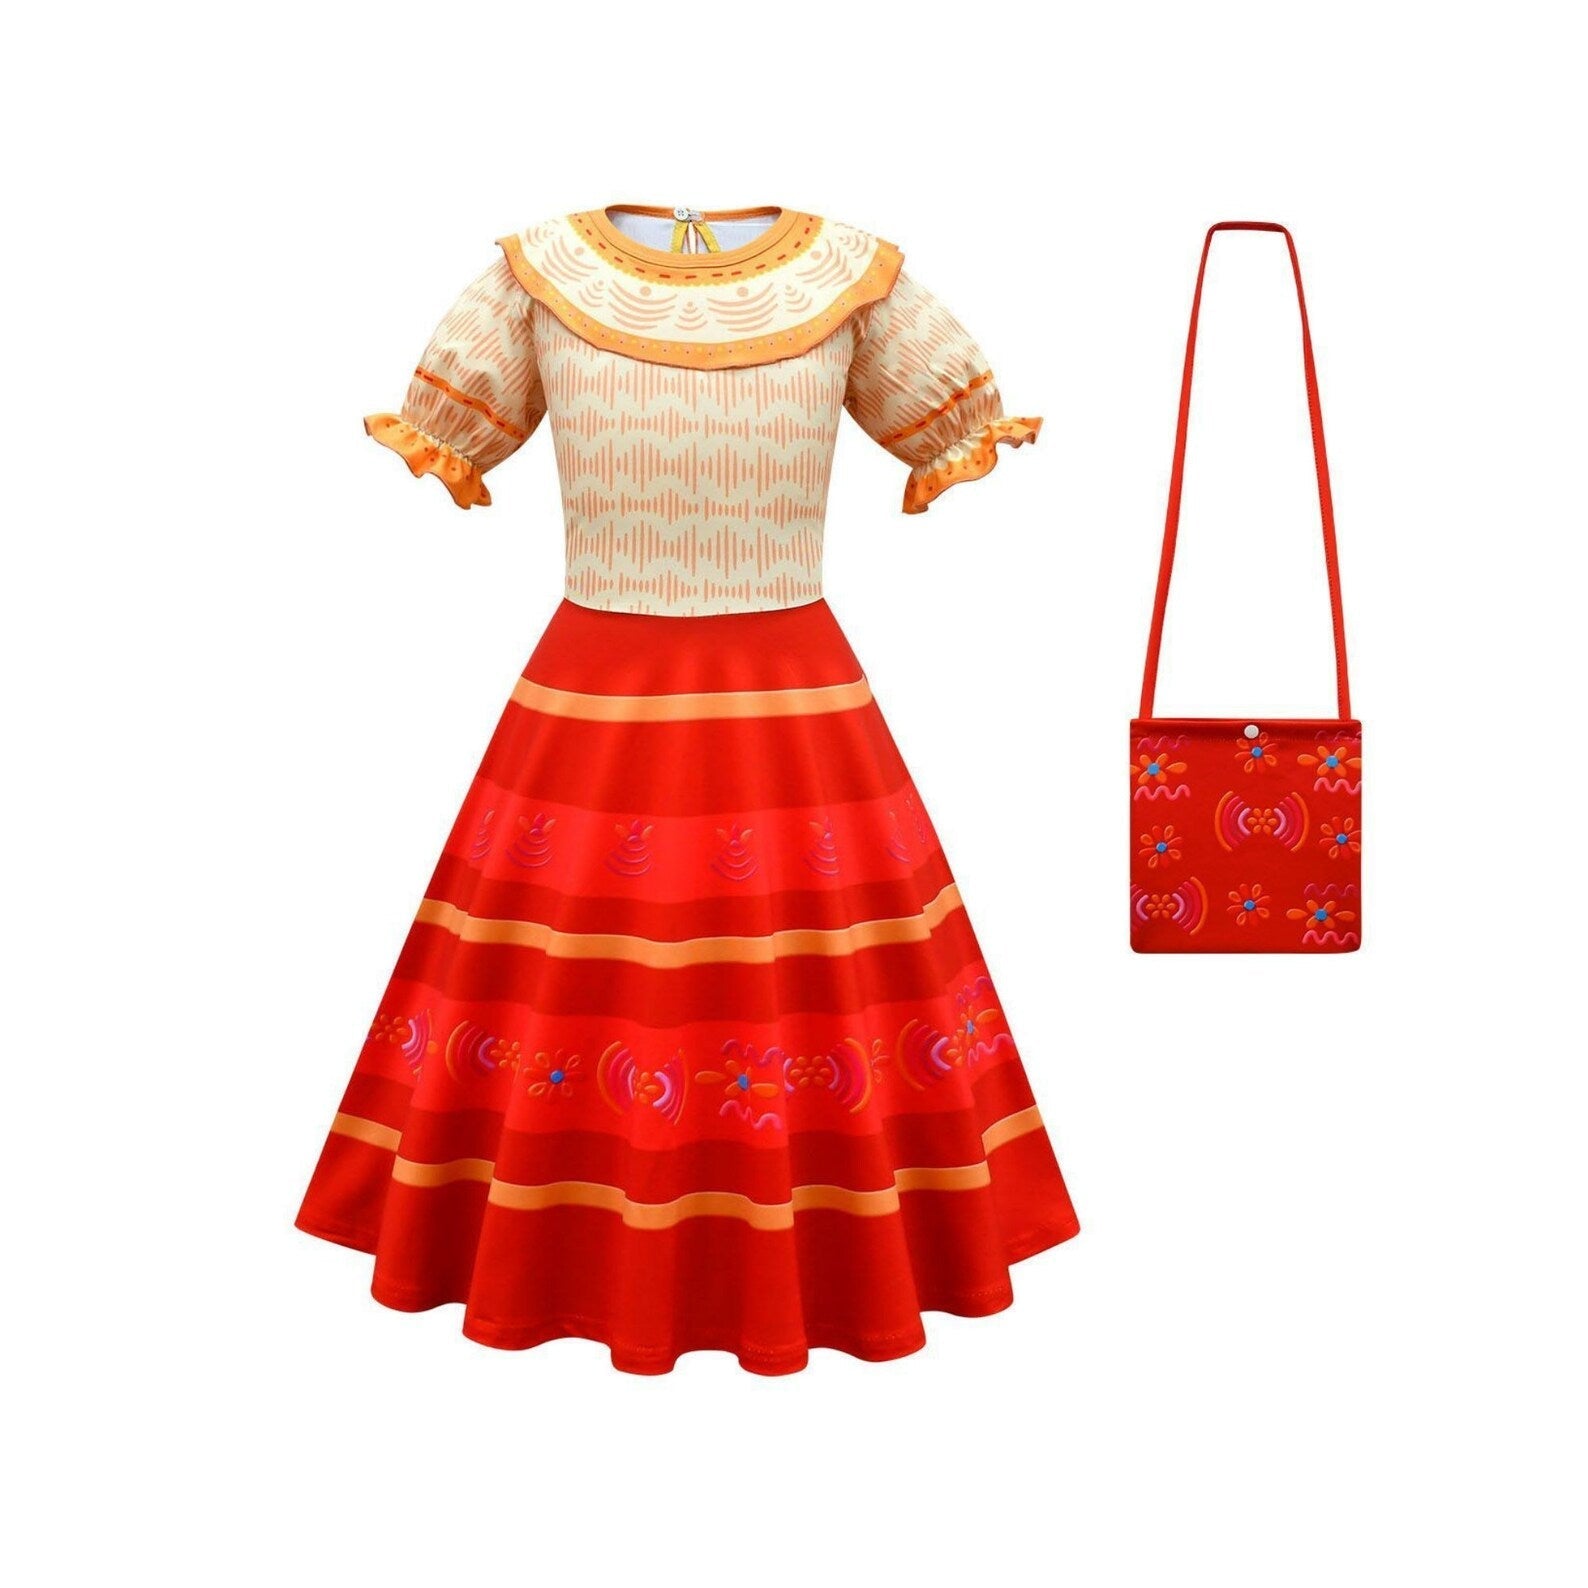 Encanto Dolores Dress and Bag with Inspired Costume Dress-up Set, Headpiece, Earrings, and Necklace